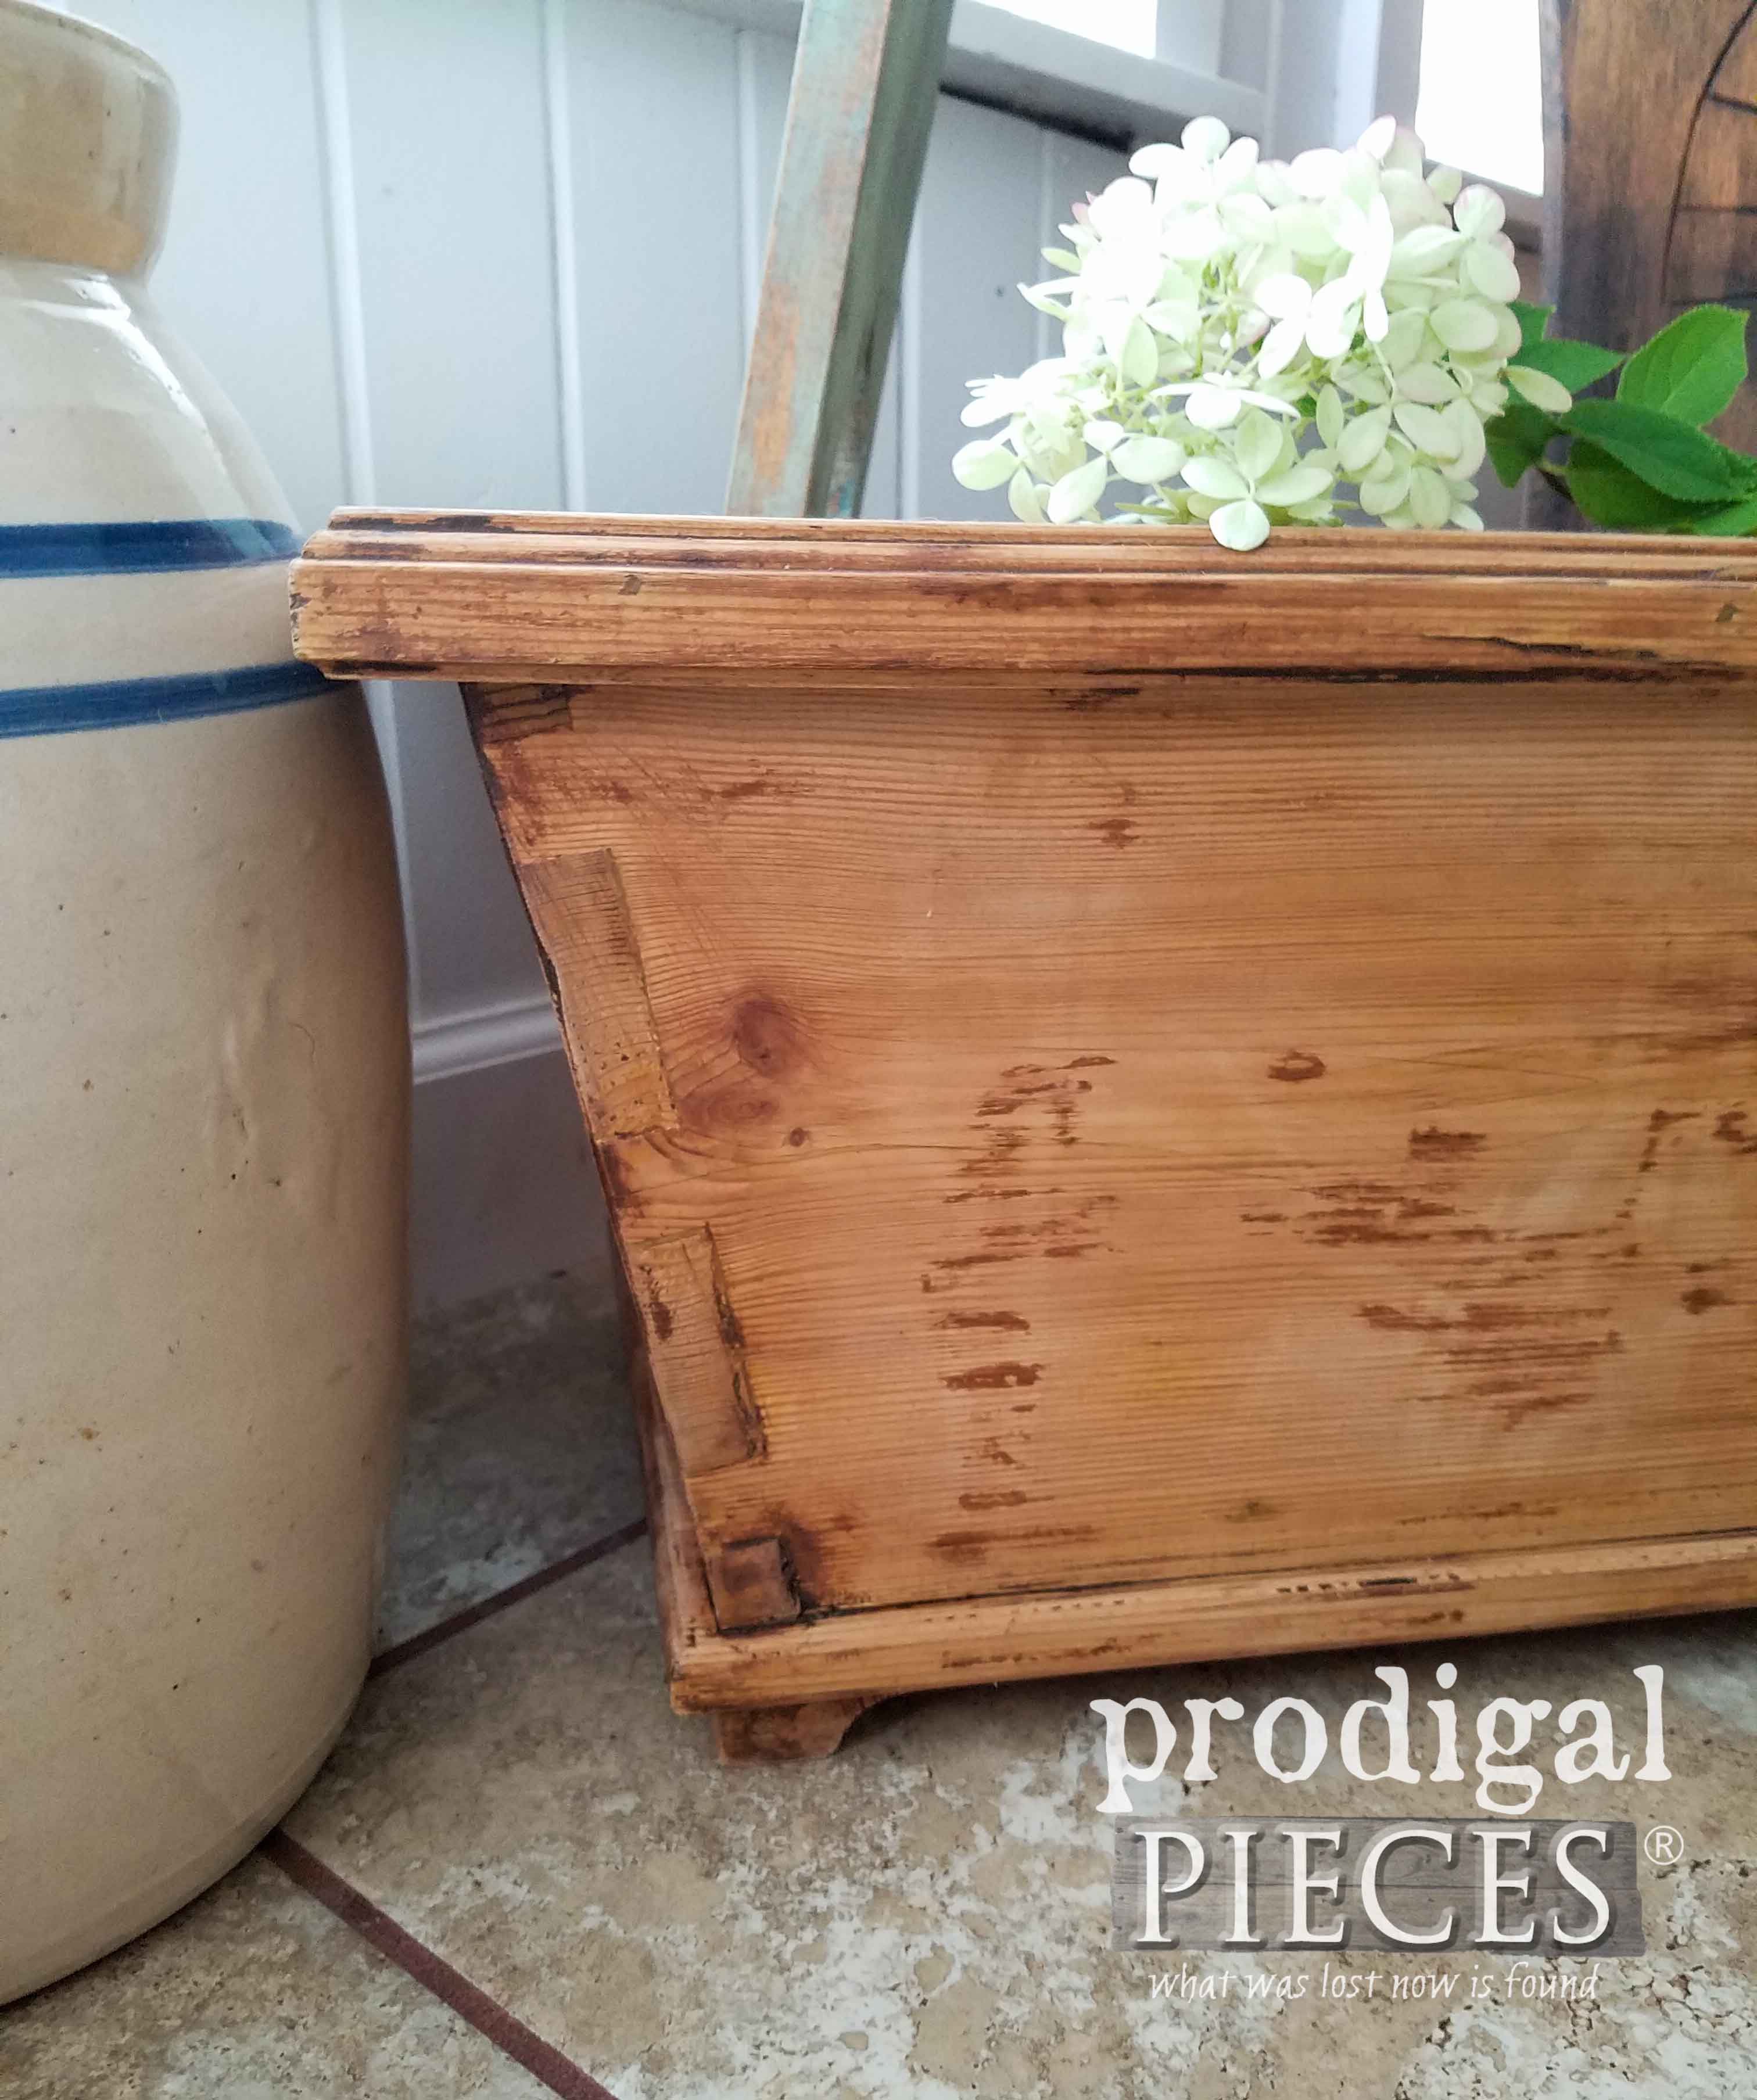 Handmade Joints on Wooden Chest by Prodigal Pieces | prodigalpieces.com